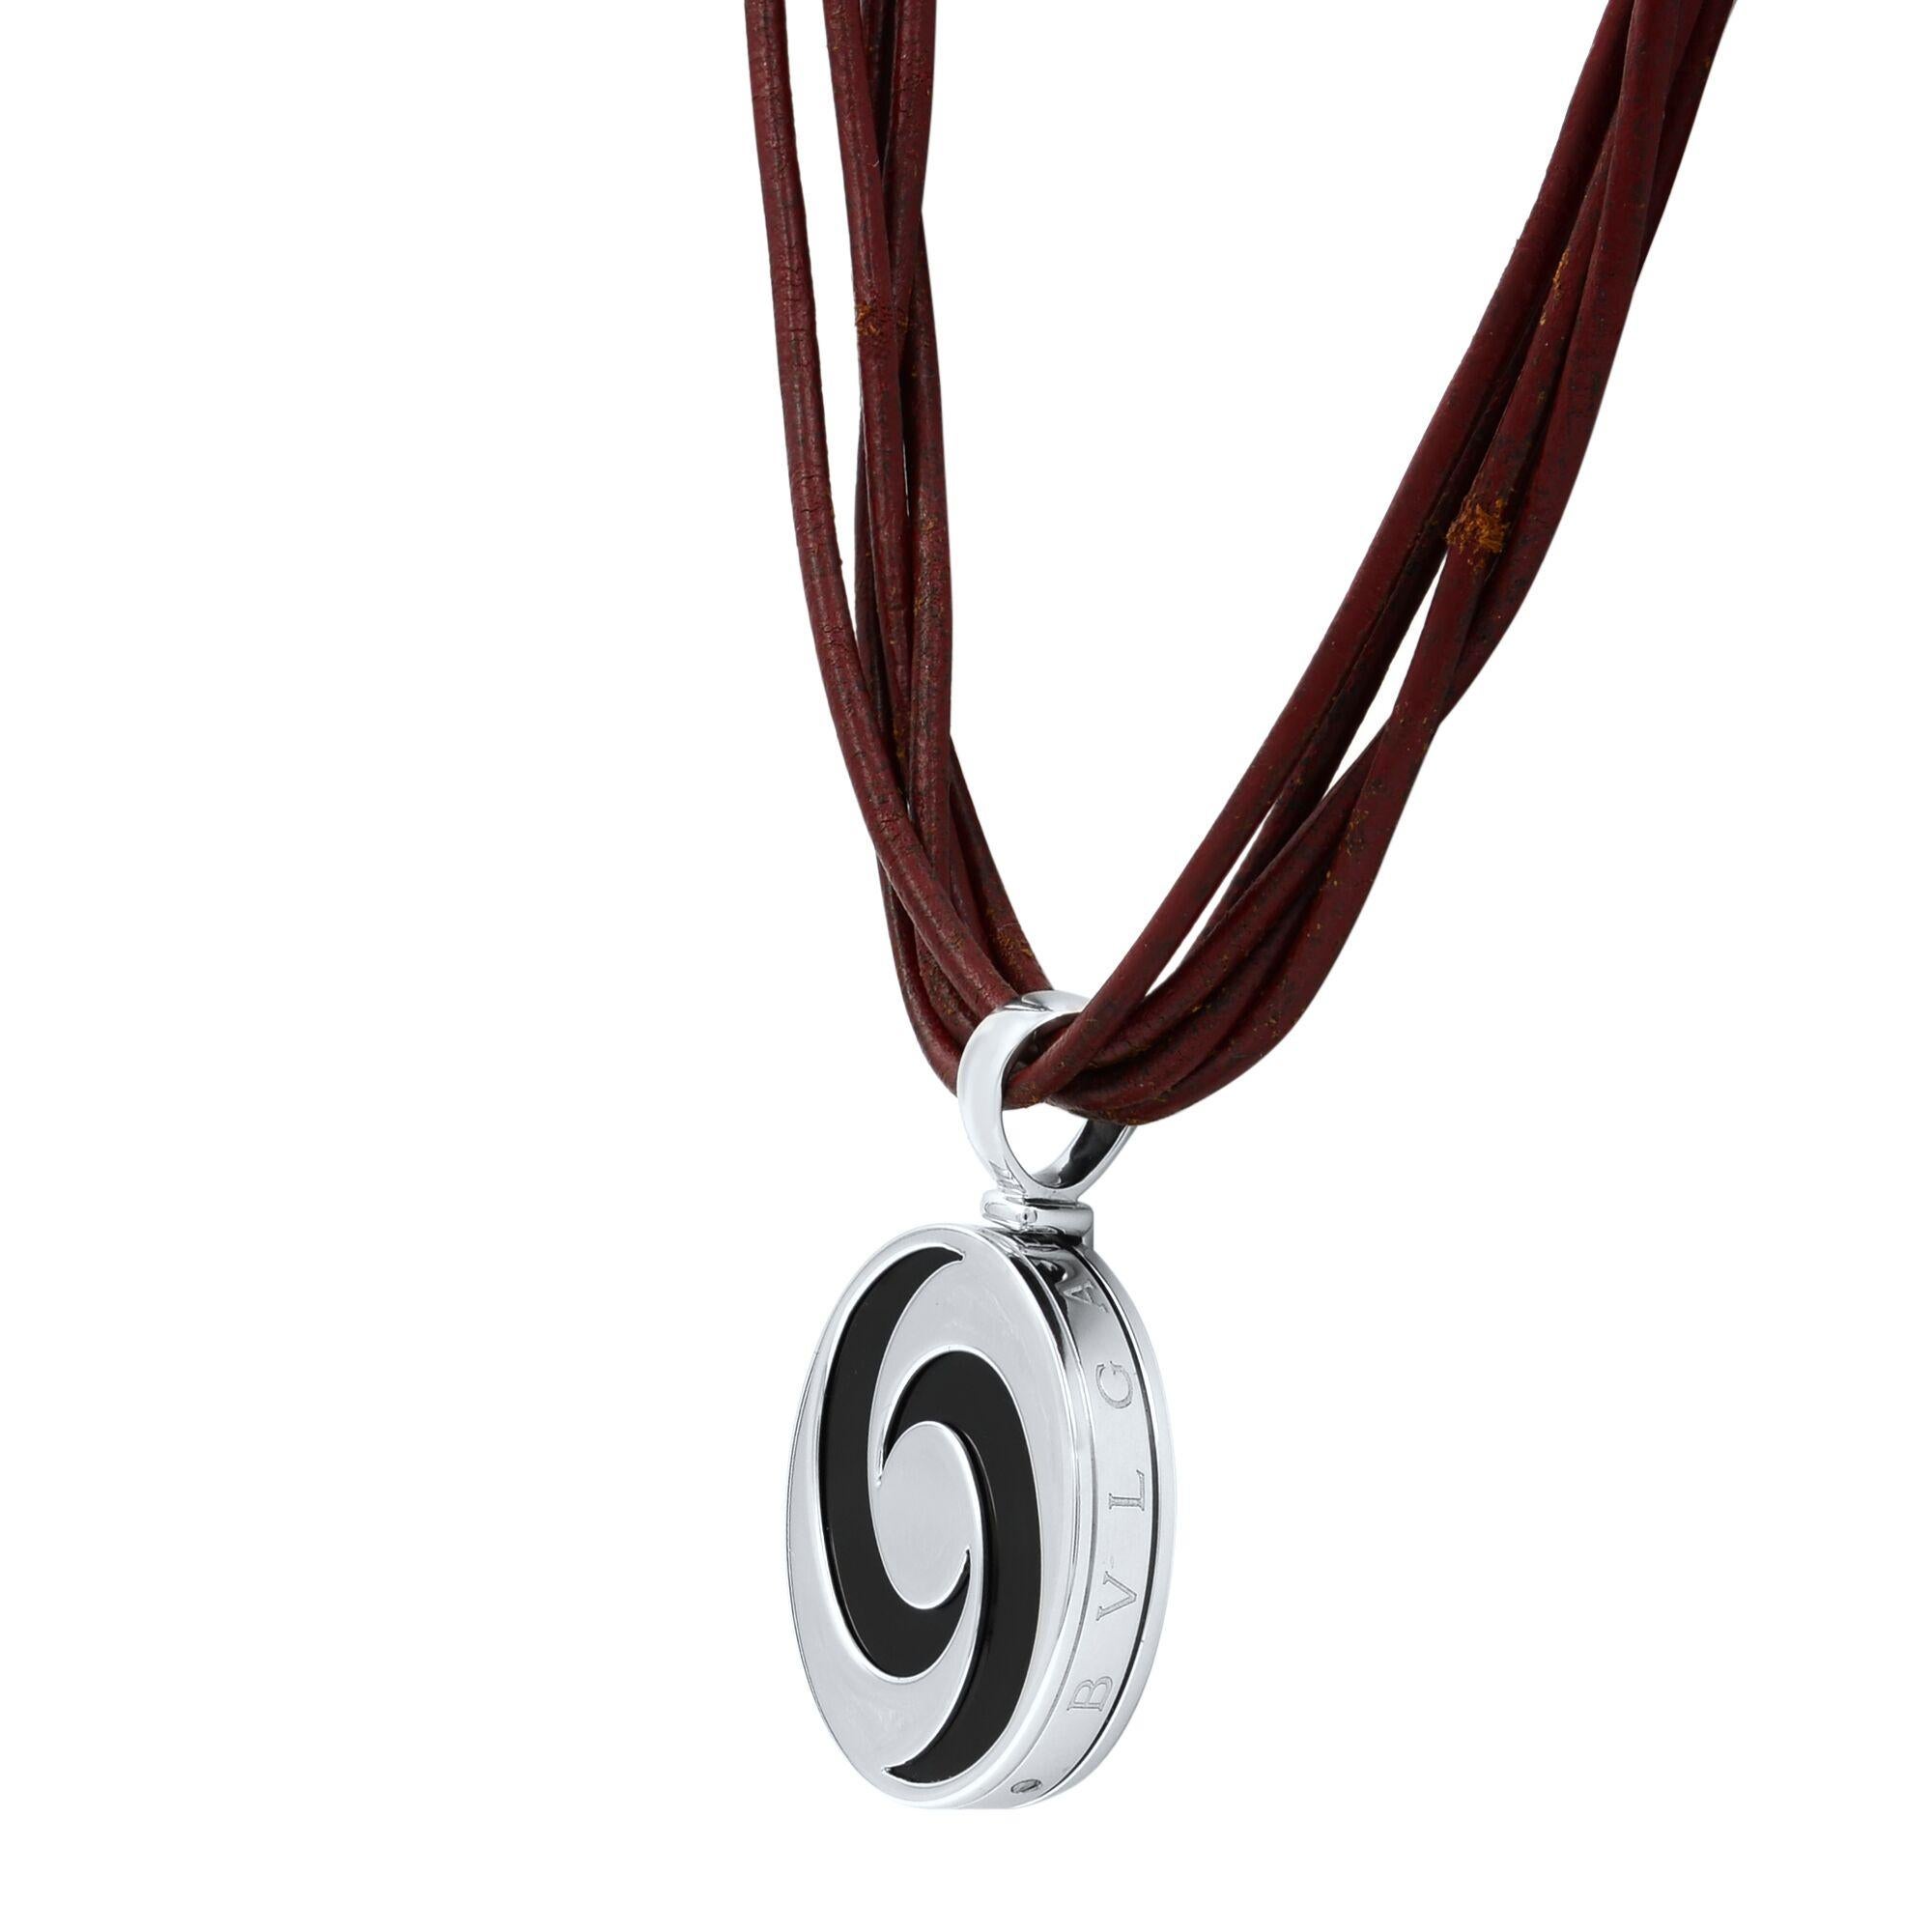 Bulgari pendant necklace from the OPTICAL collection, the large round shape has steel case with a black onyx inside the round frame spins creating an optical illusion. It has 18k yellow gold accent engraved BVLGARI around the thick frame. It is